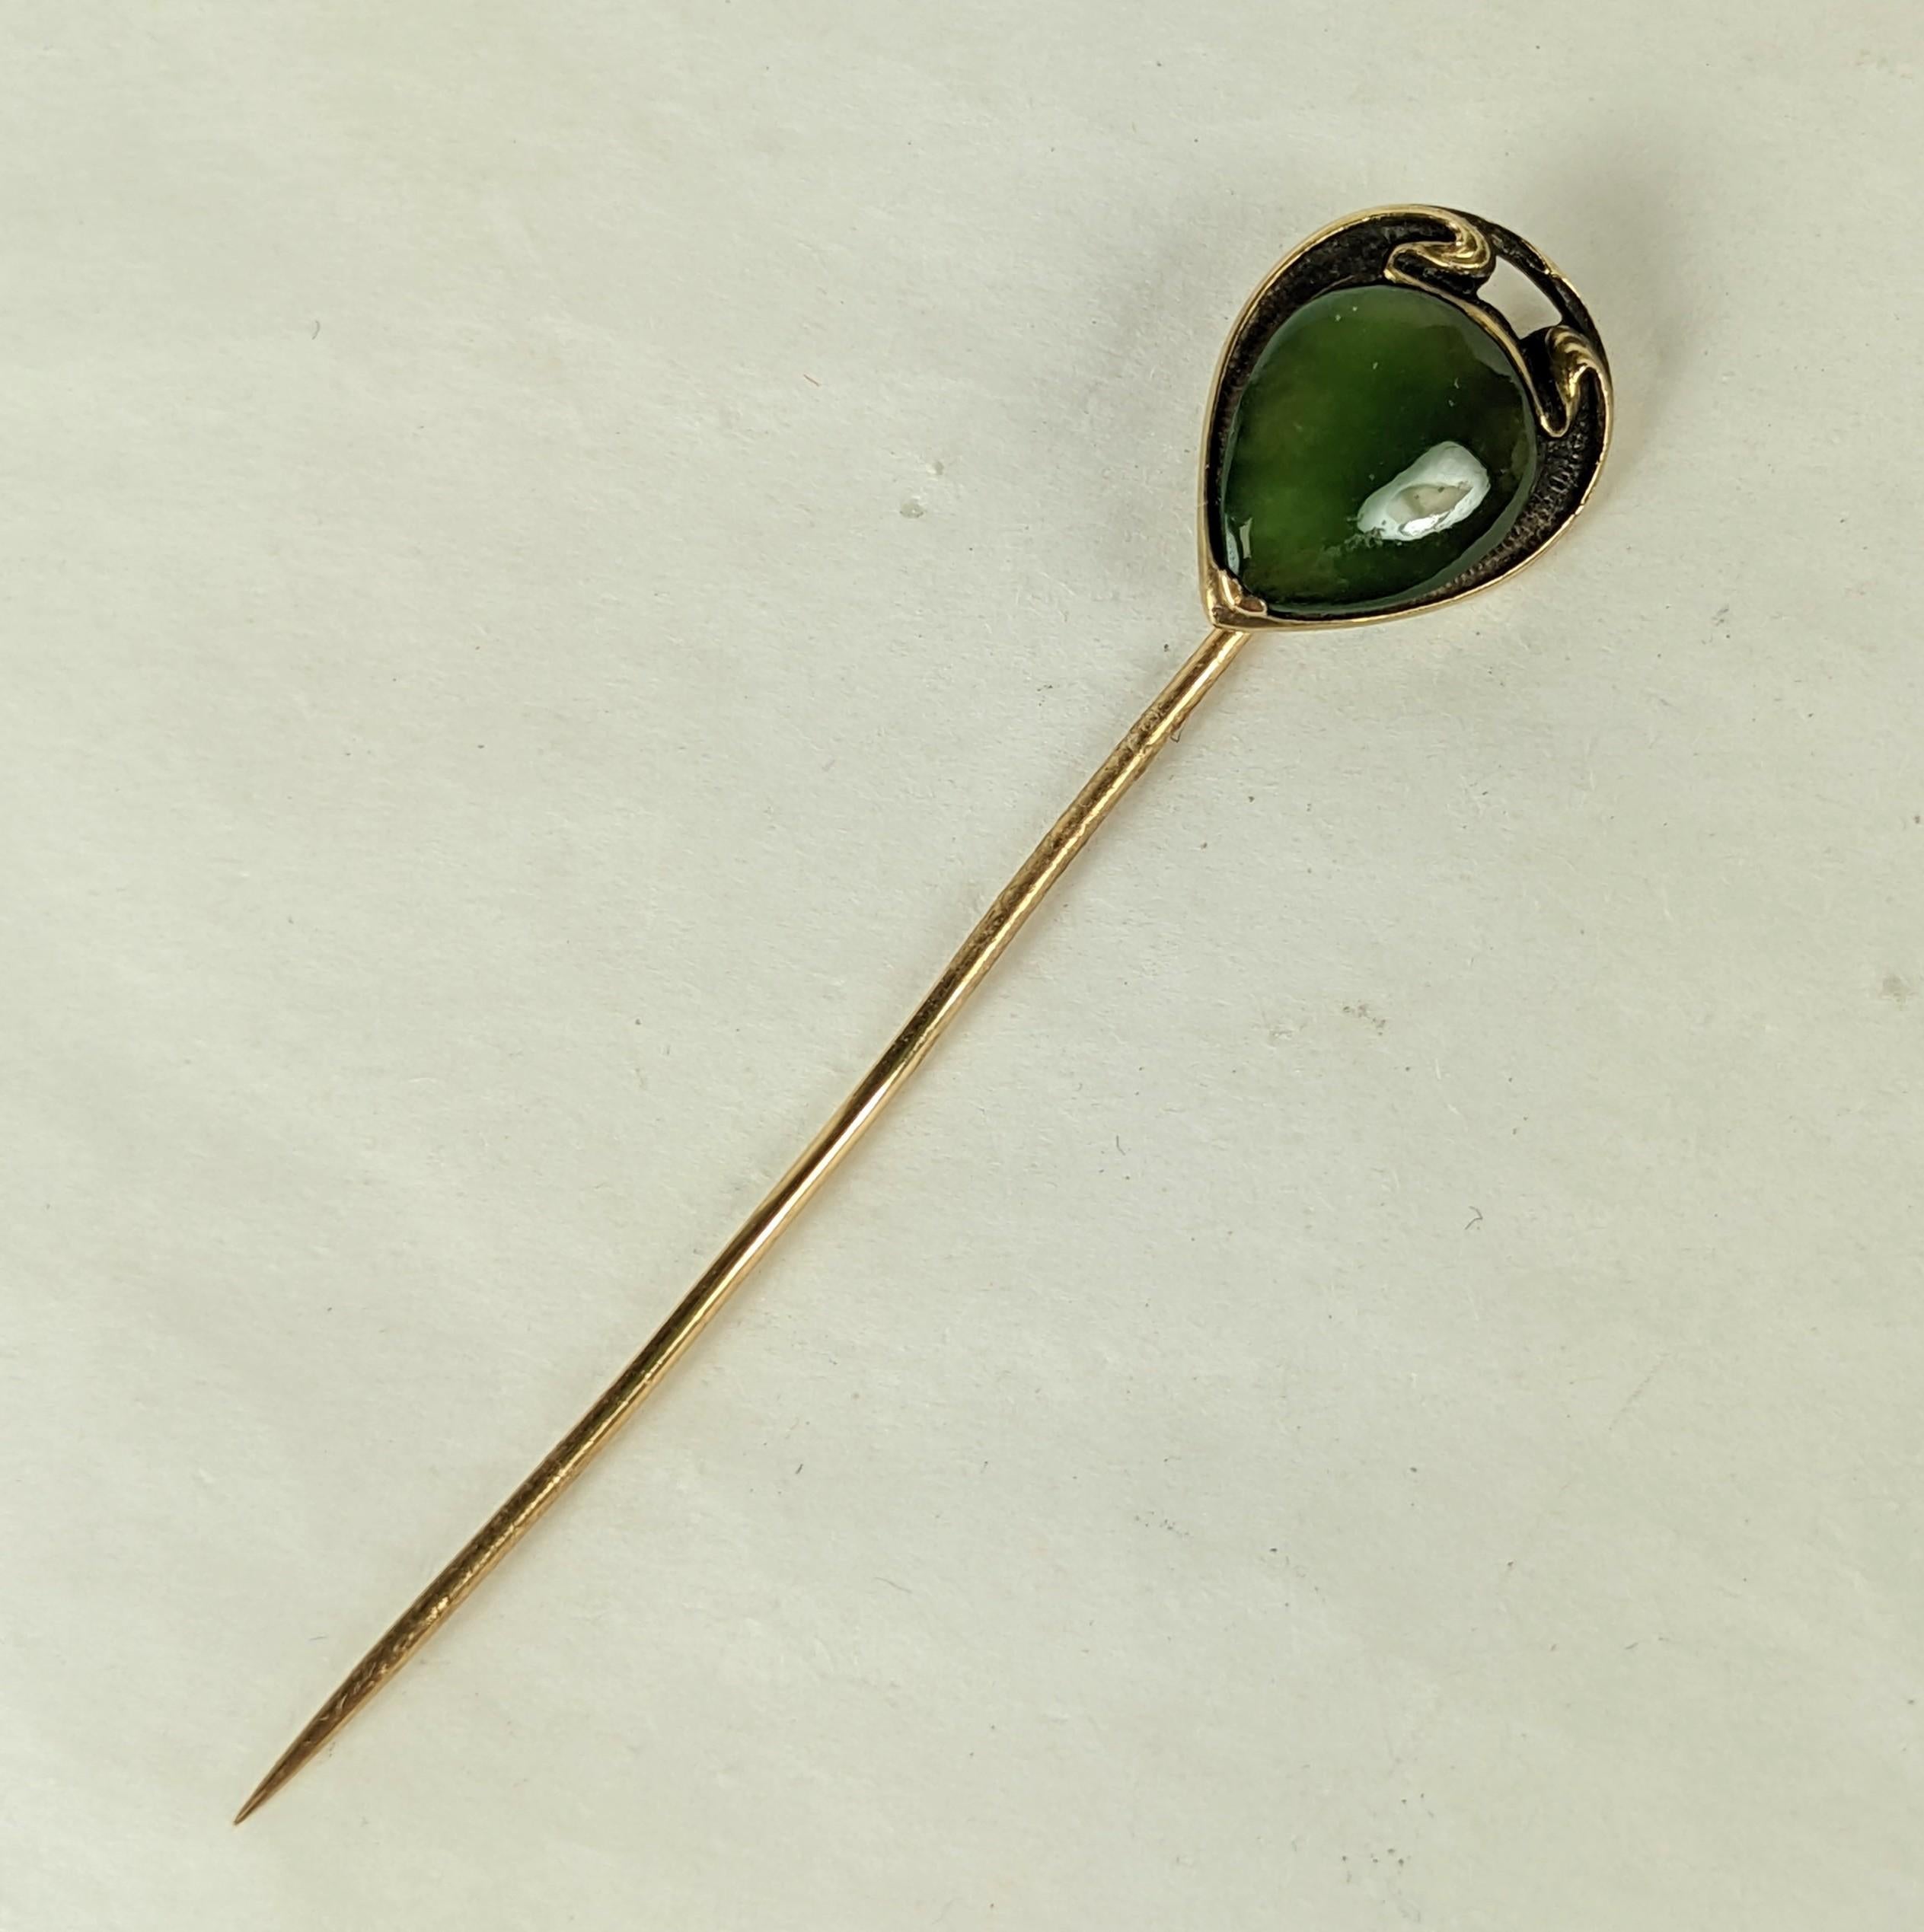 Lovely Jade Art Nouveau Stick Pin circa 1900 USA. Made in the jewelry hub of Newark NY with 14K gold hallmarks in patinaed gold whiplash setting. 
.5